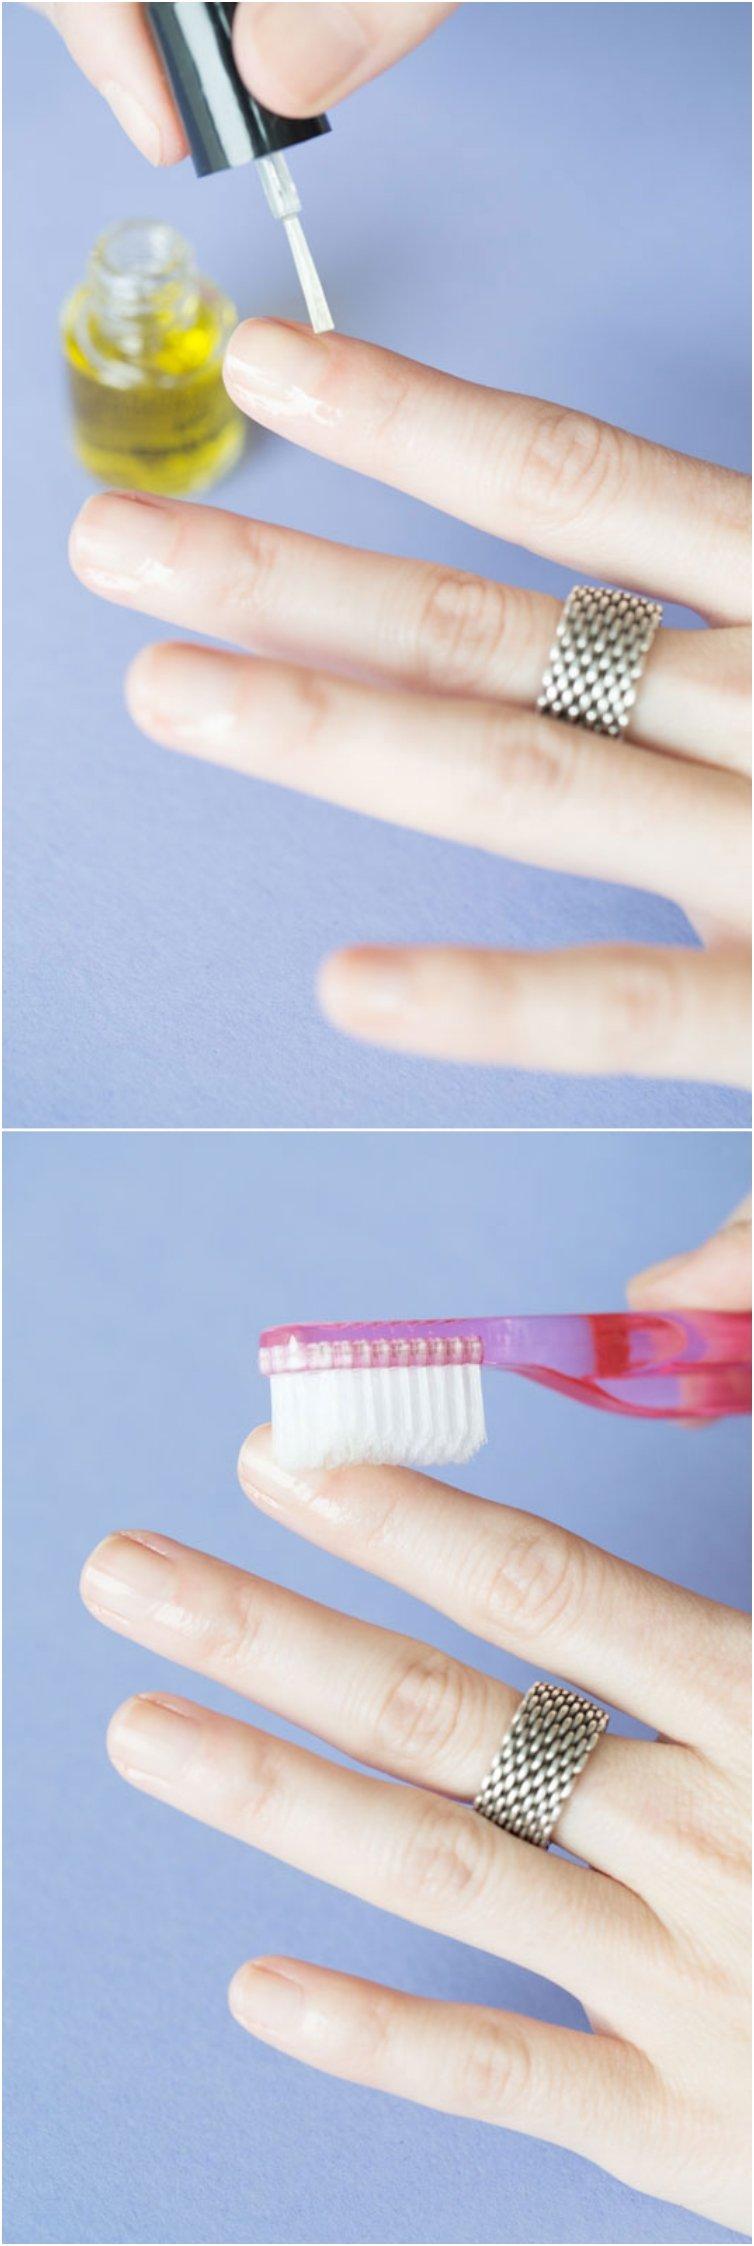 Clean up your cuticles with cuticle oil and a toothbrush.